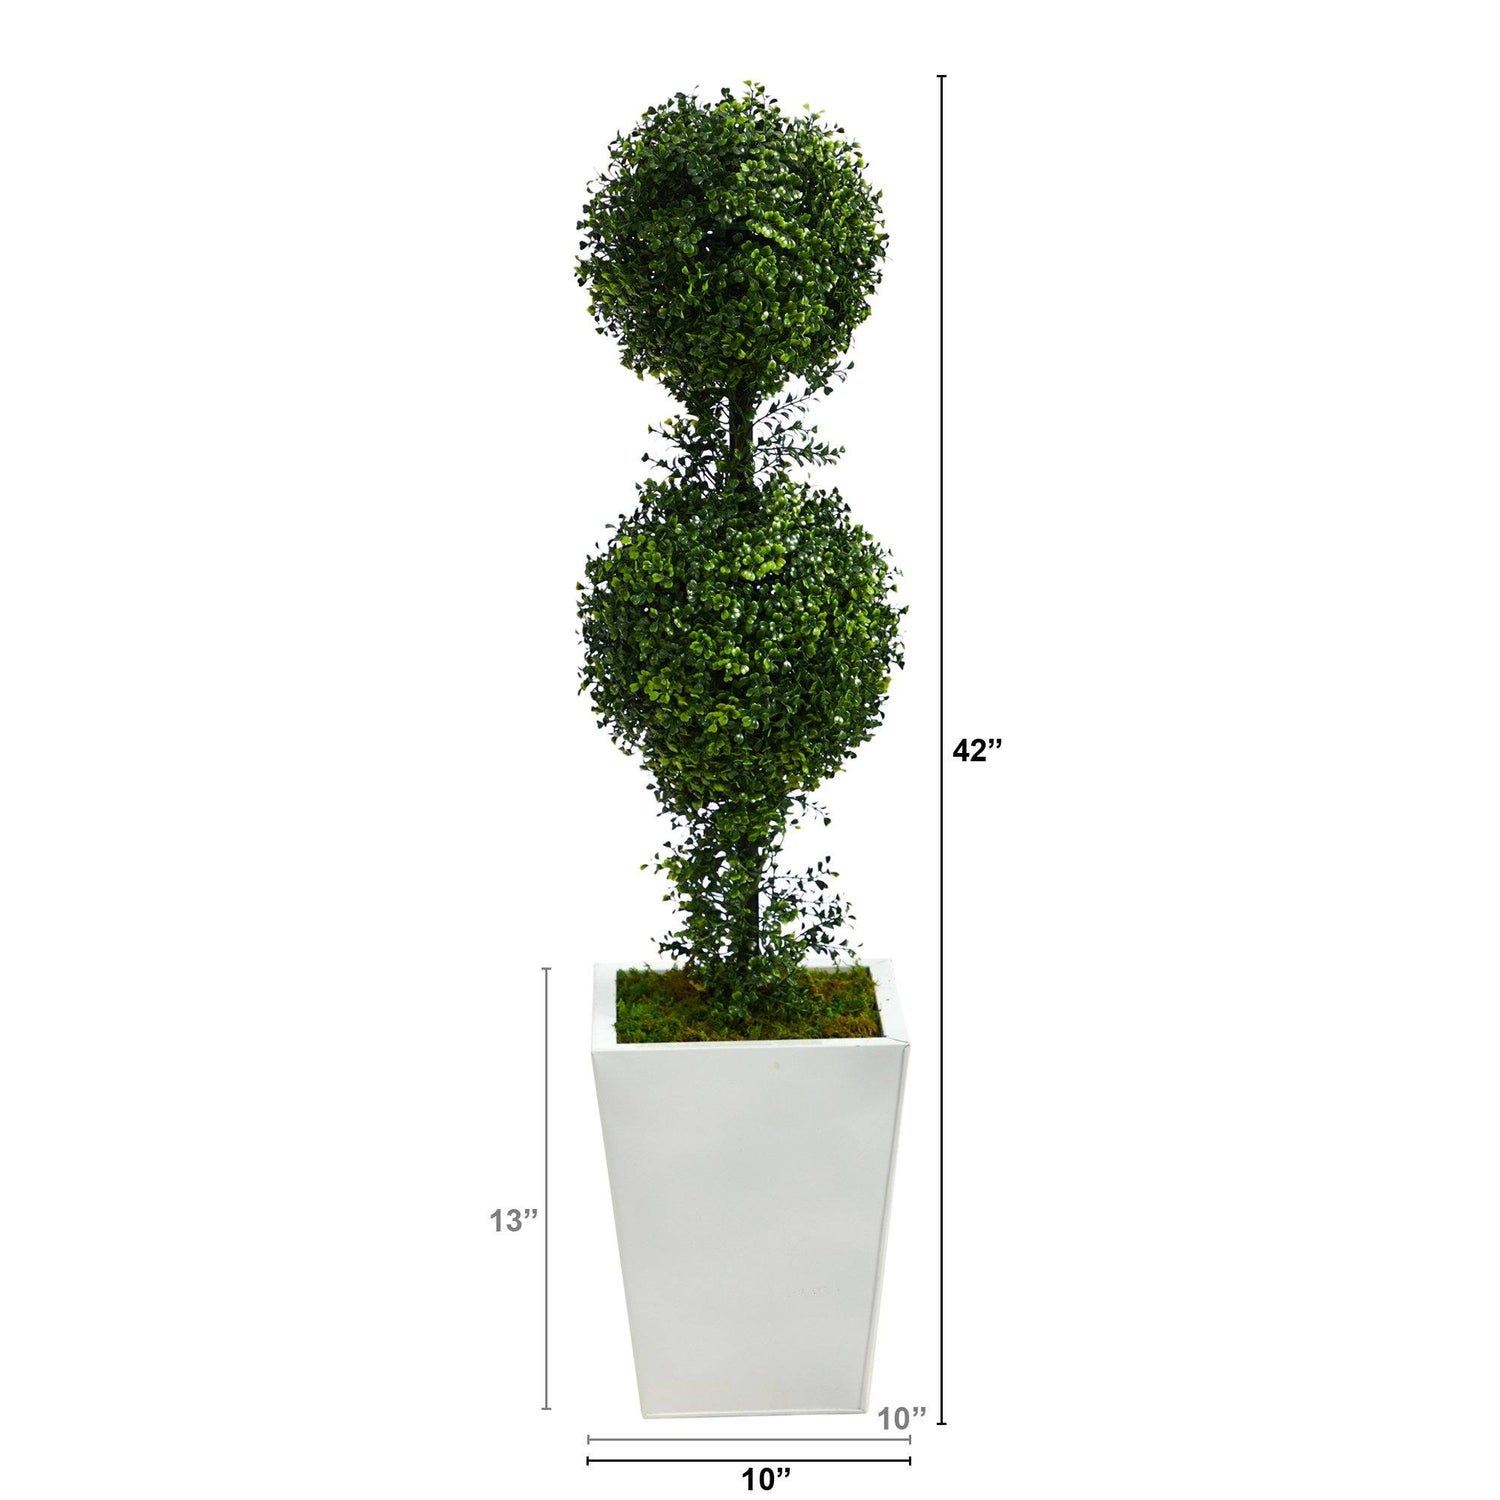 3.5’ Boxwood Double Ball Topiary Artificial Tree in White Metal Planter(Indoor/Outdoor)